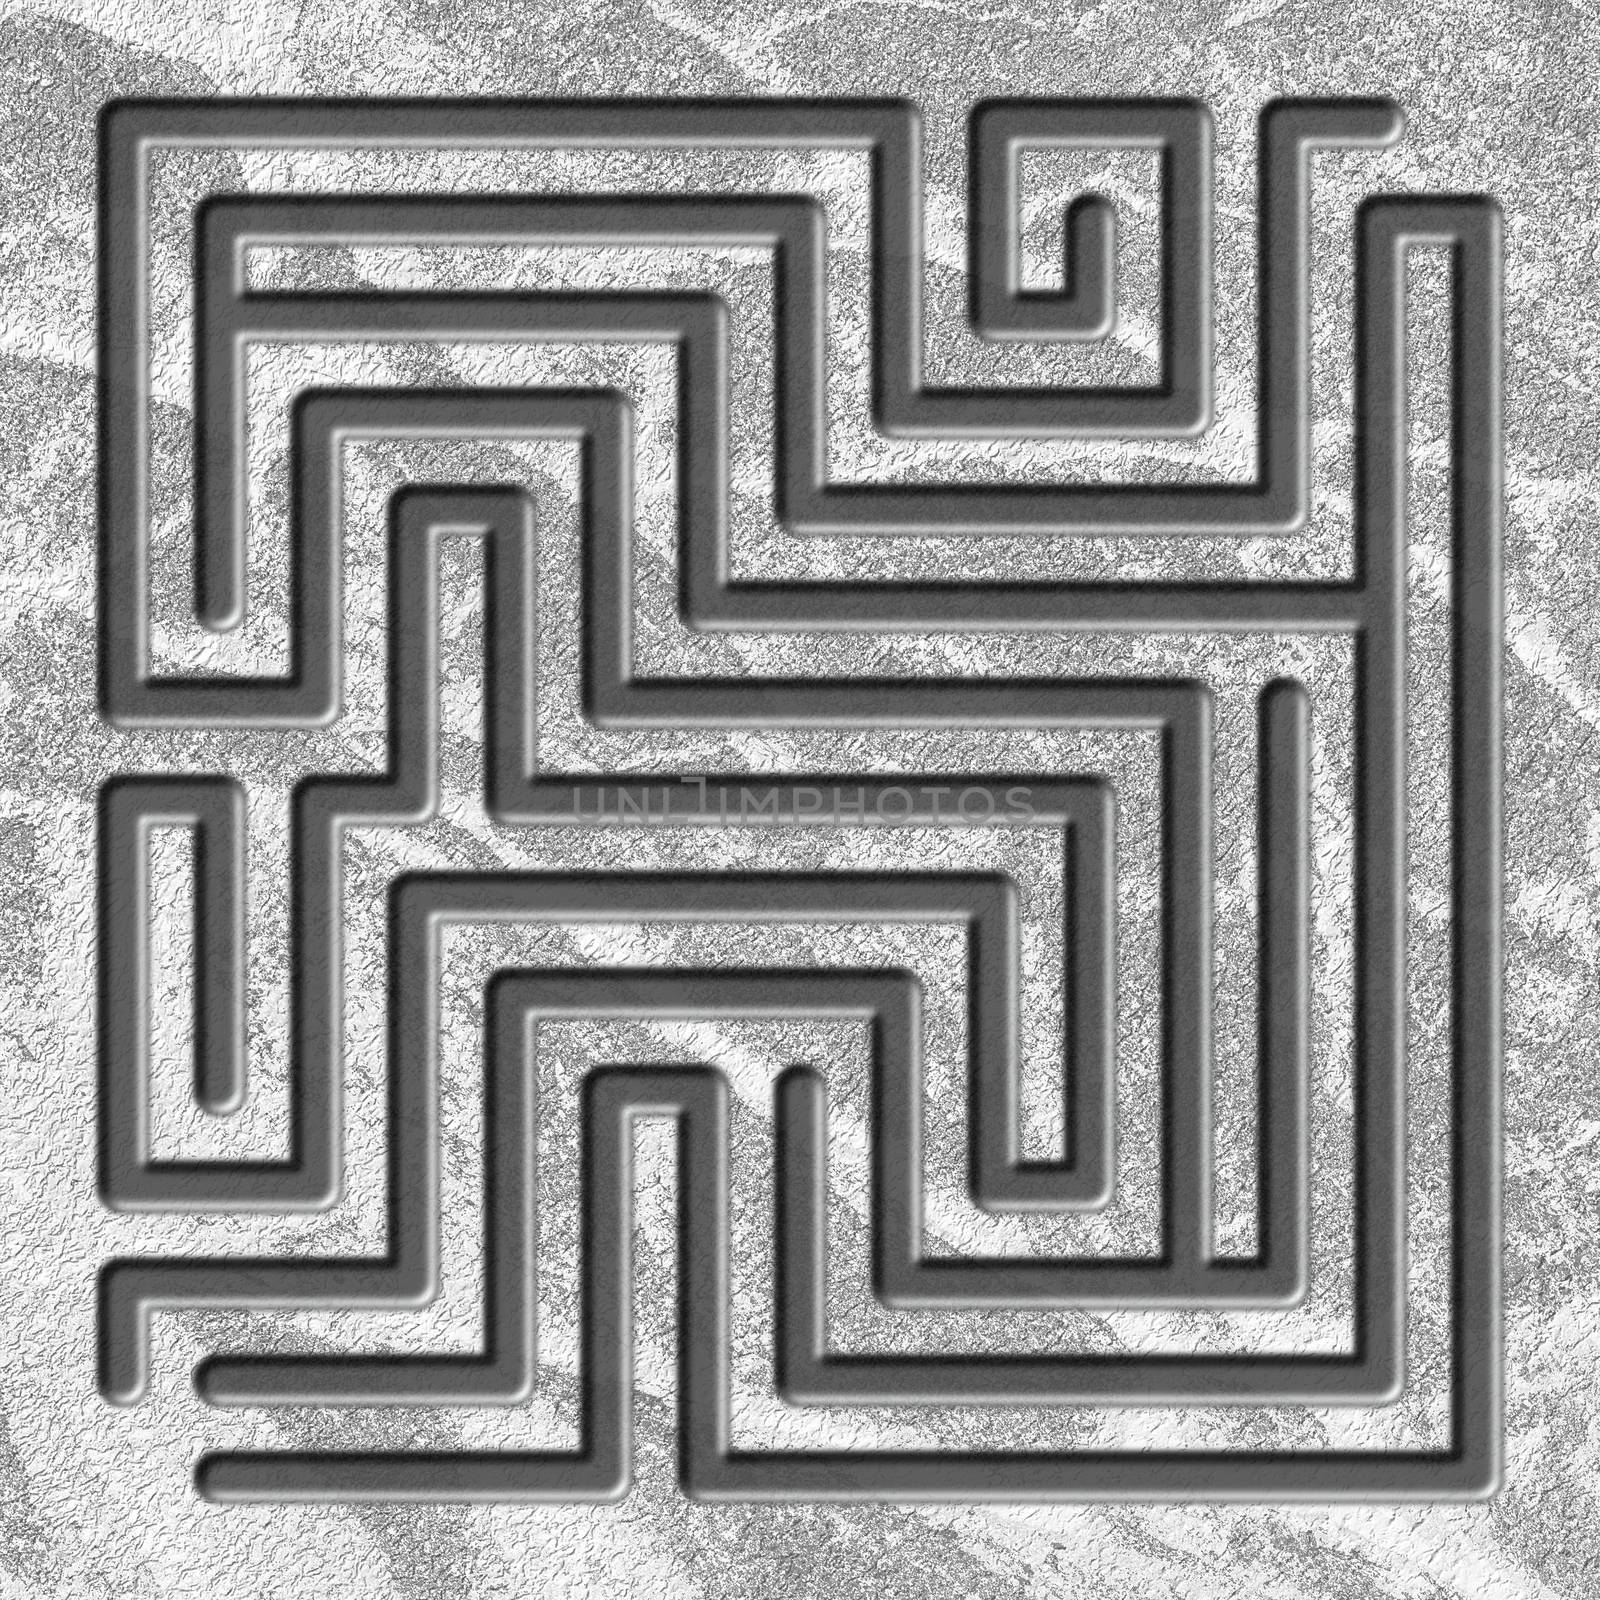 maze game scheme by Visual-Content